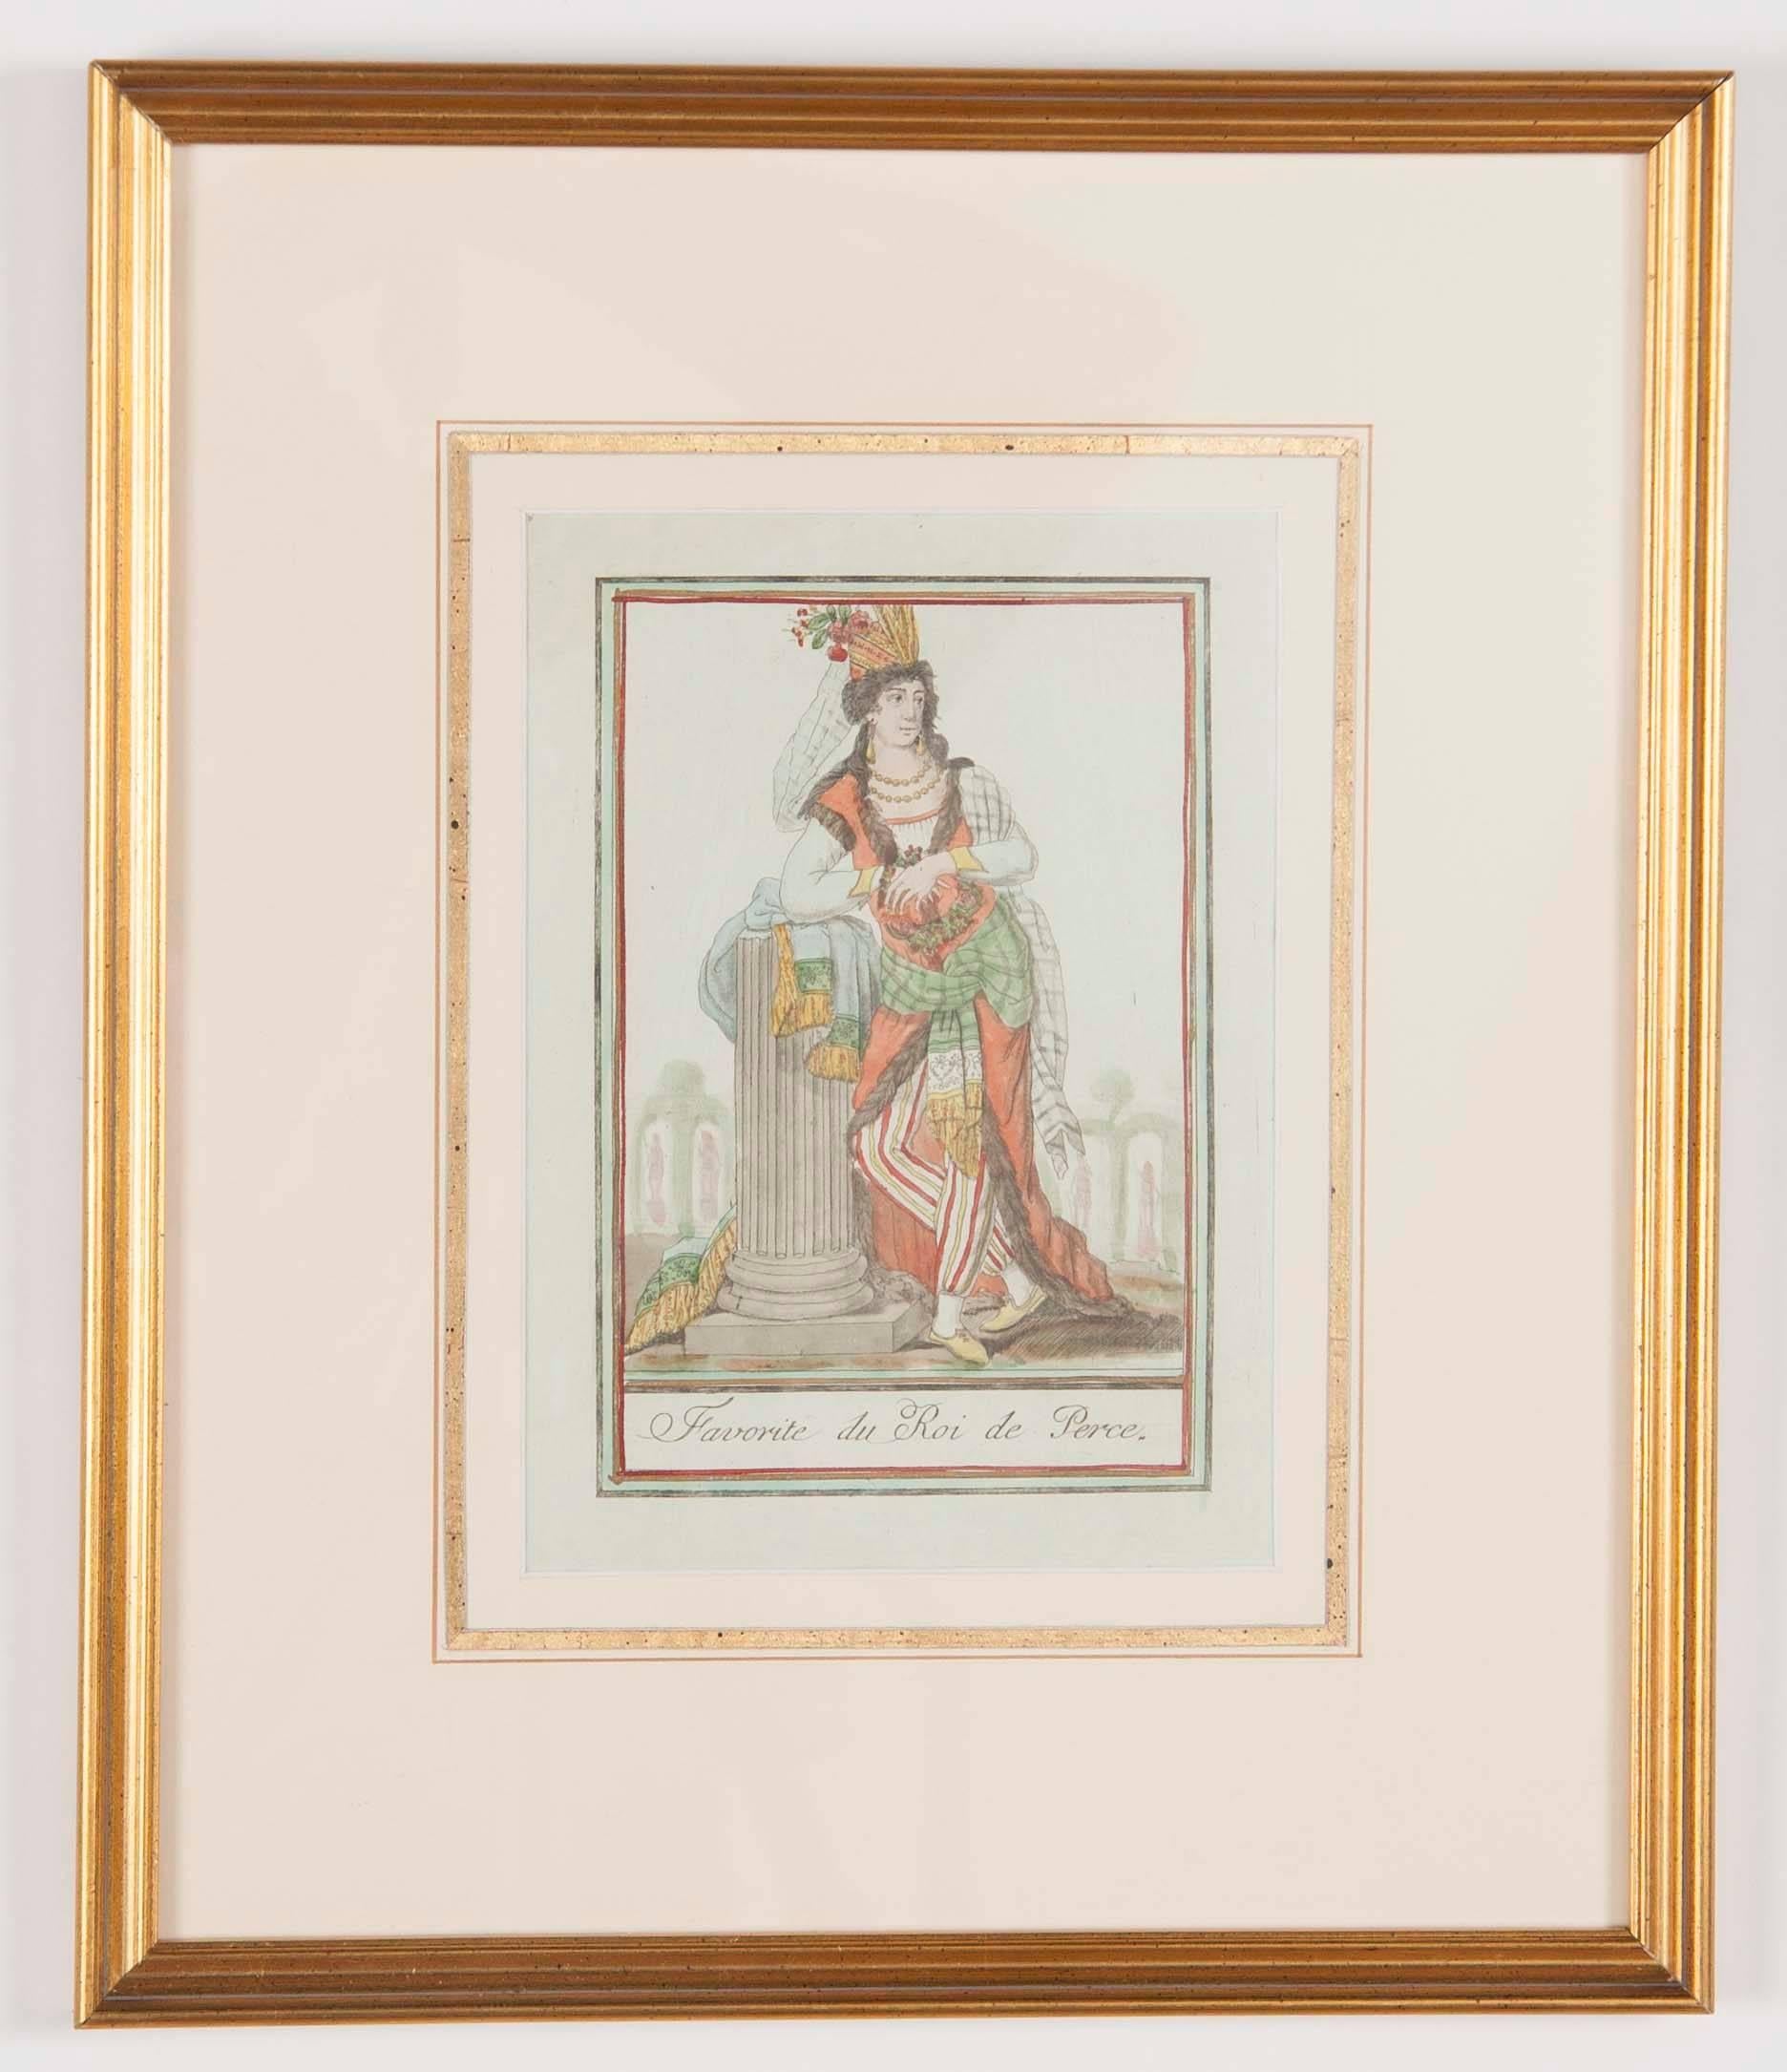 Charming set of six 'Costumes of Various Countries' by Jacques Grasset de Saint-Sauveur, circa 1797. Hand colored engravings on paper. Another six are available in the following listing. Can be purchased as pairs also. Beautifully matted and framed.